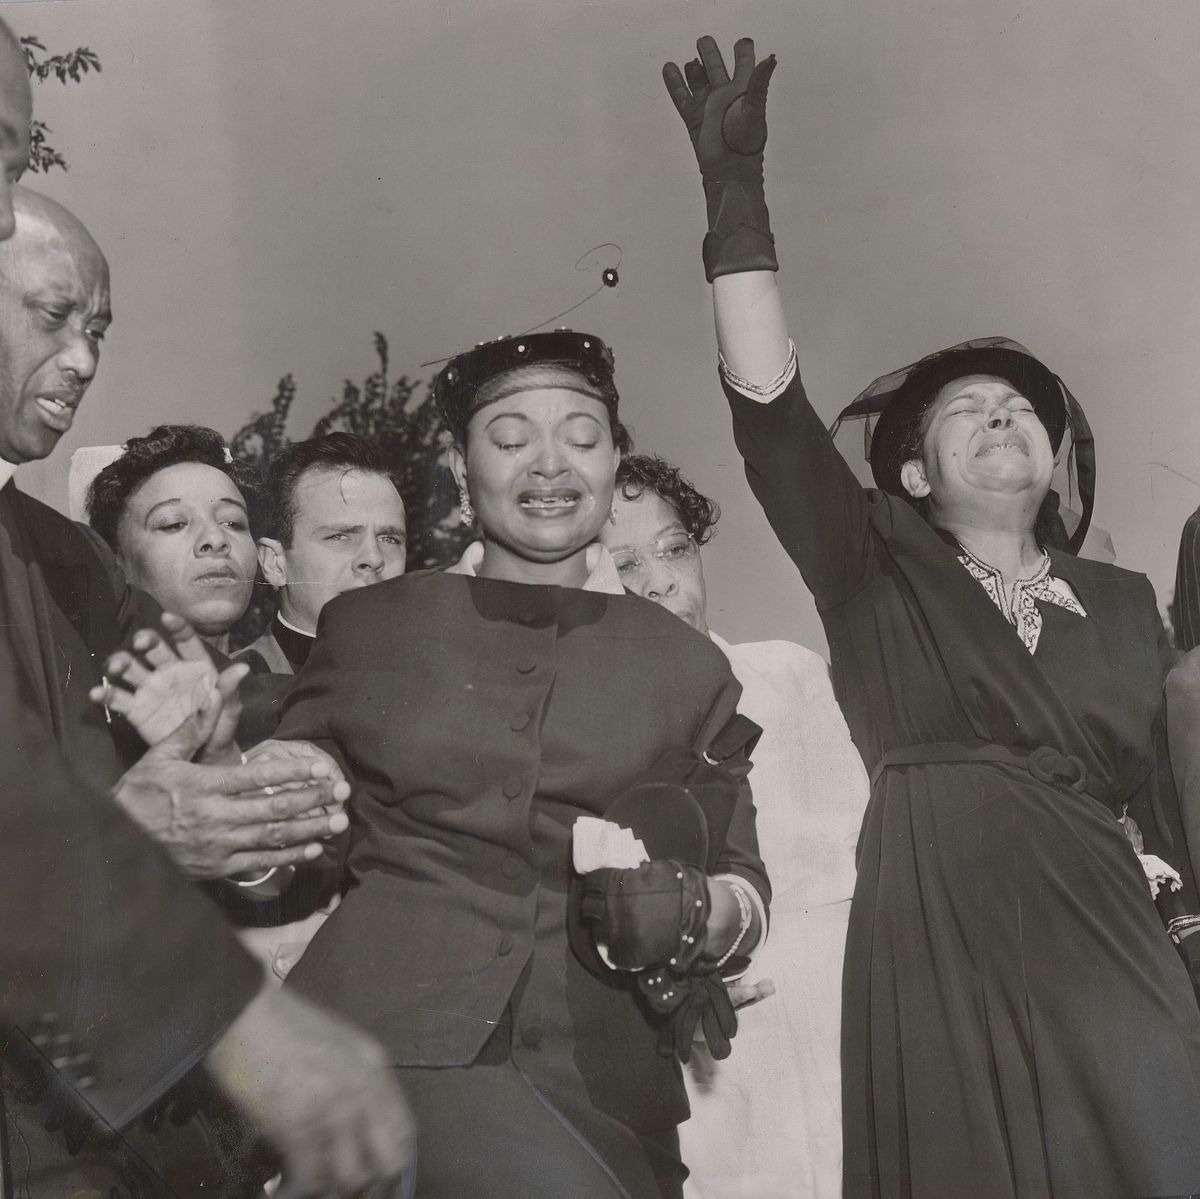 Mamie Till-Mobley (centre) and other mourners at Emmett Till's funeral, 6 September 1955 Photo: Dave Mann / Collection of the Smithsonian National Museum of African American History and Culture